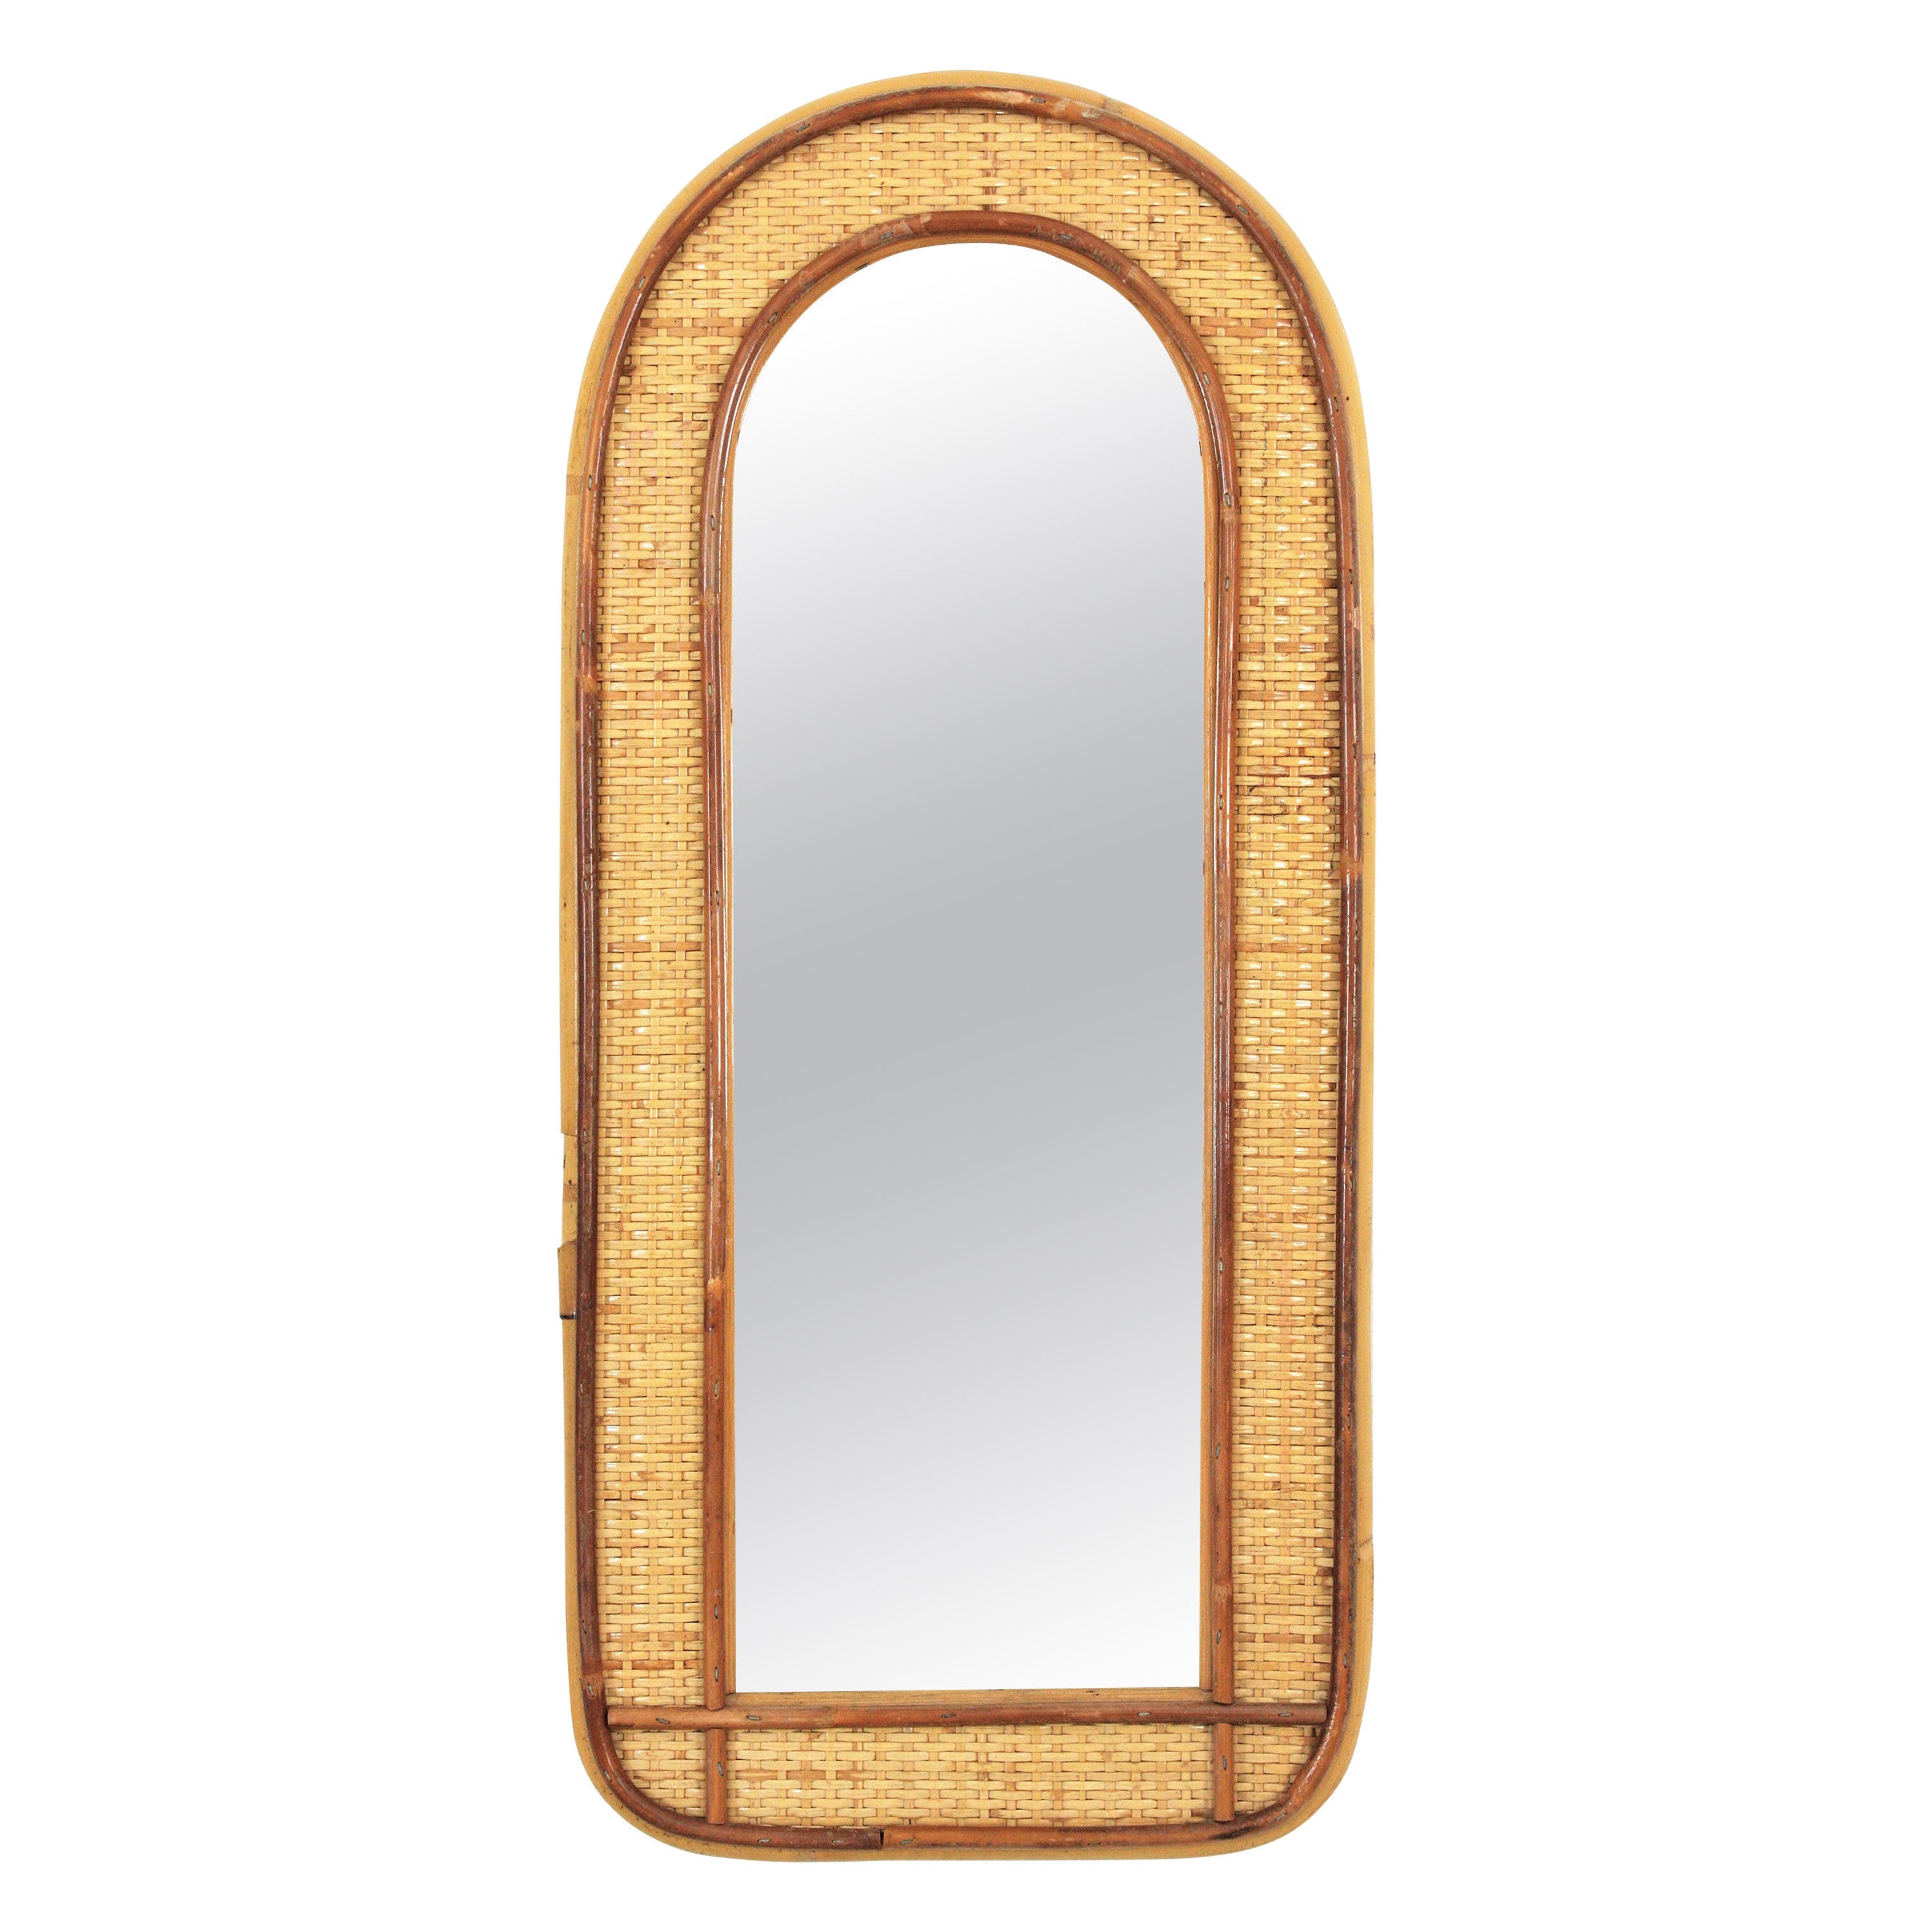 Rattan Woven Wicker Wall Mirror with Arched Top For Sale